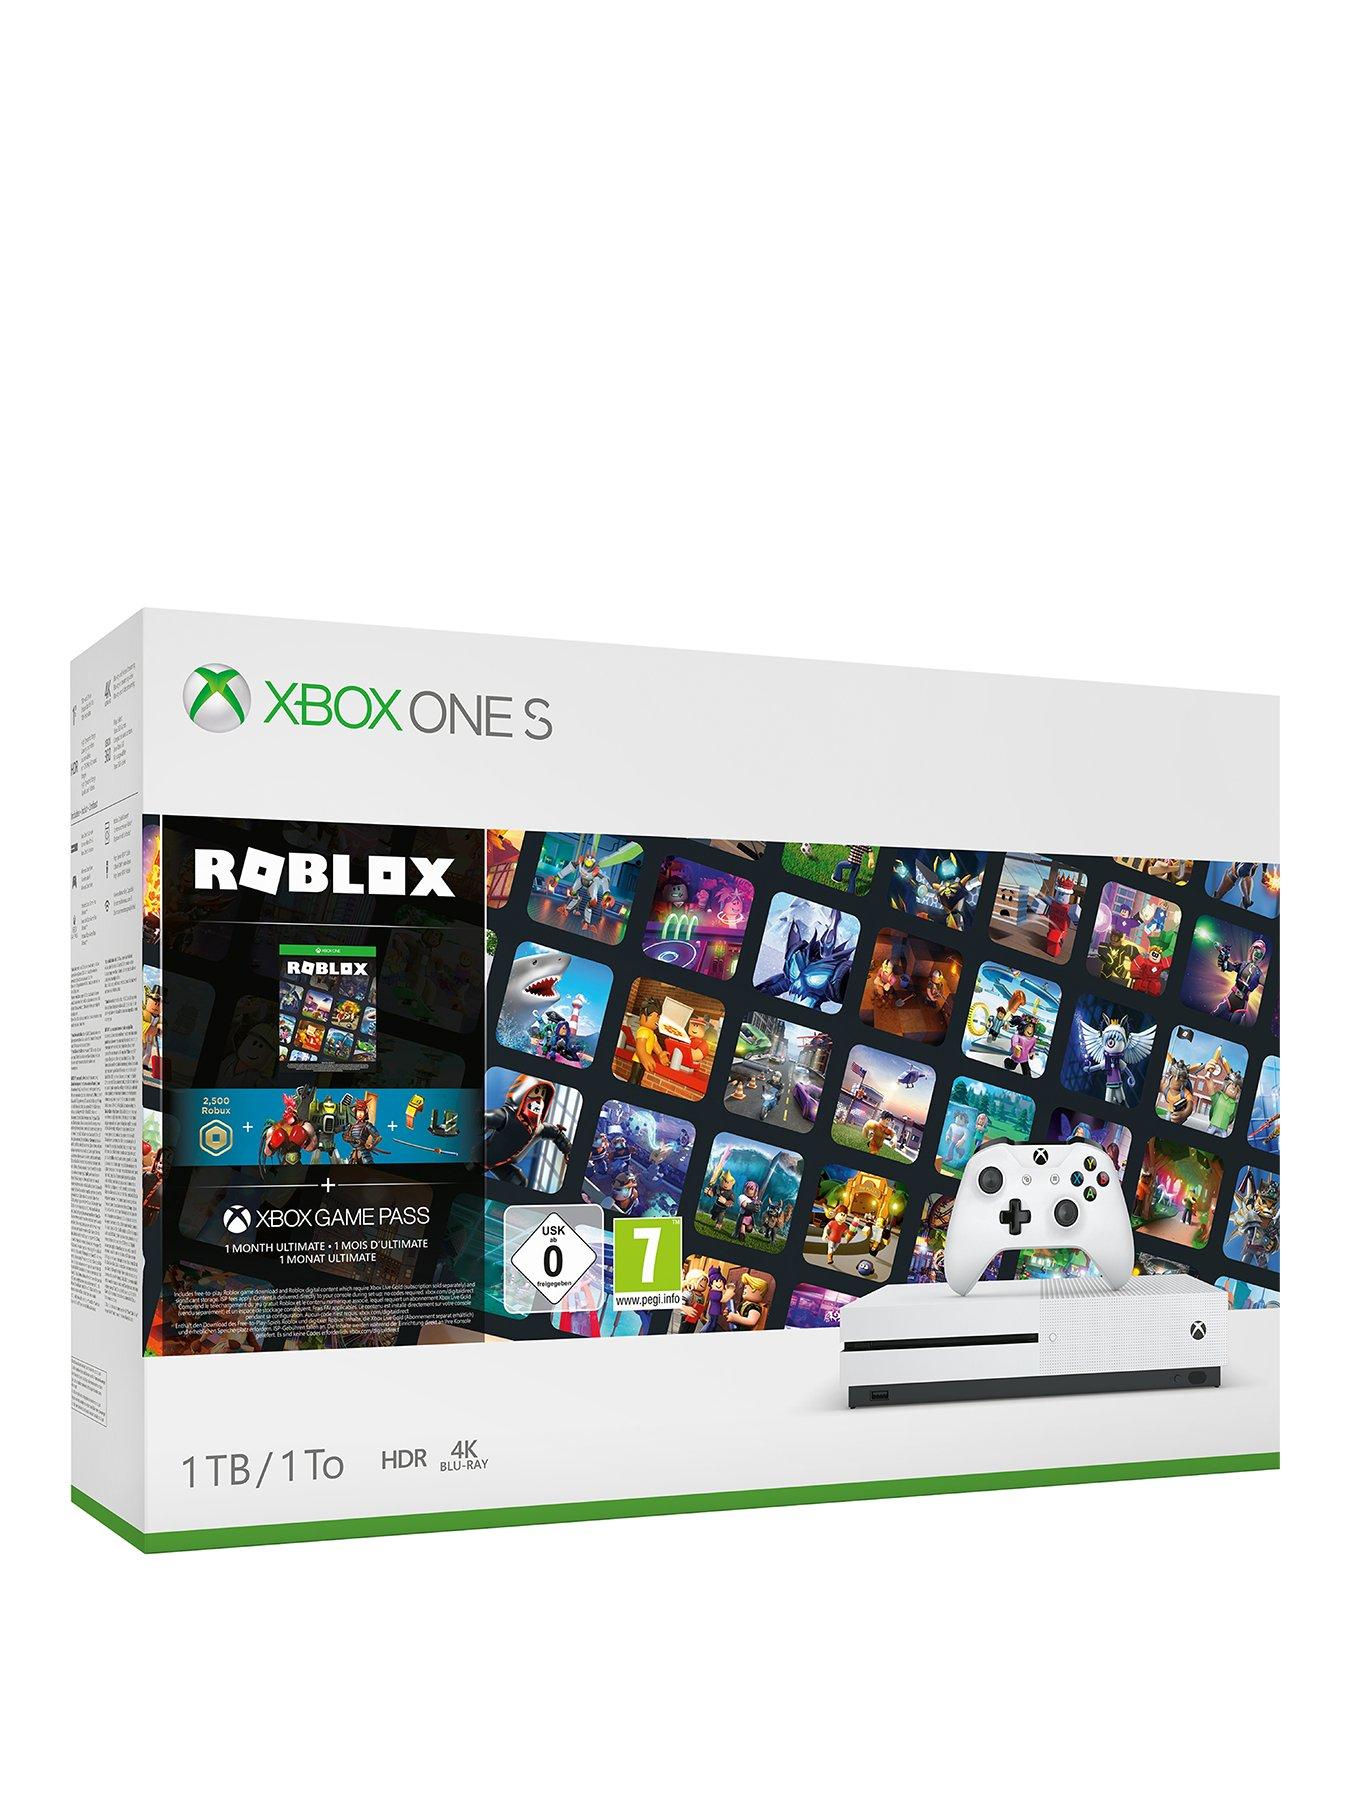 Xbox One S Roblox Bundle 1tb With Optional Extras Littlewoods Com - for lol roblox group members iphone case cover by